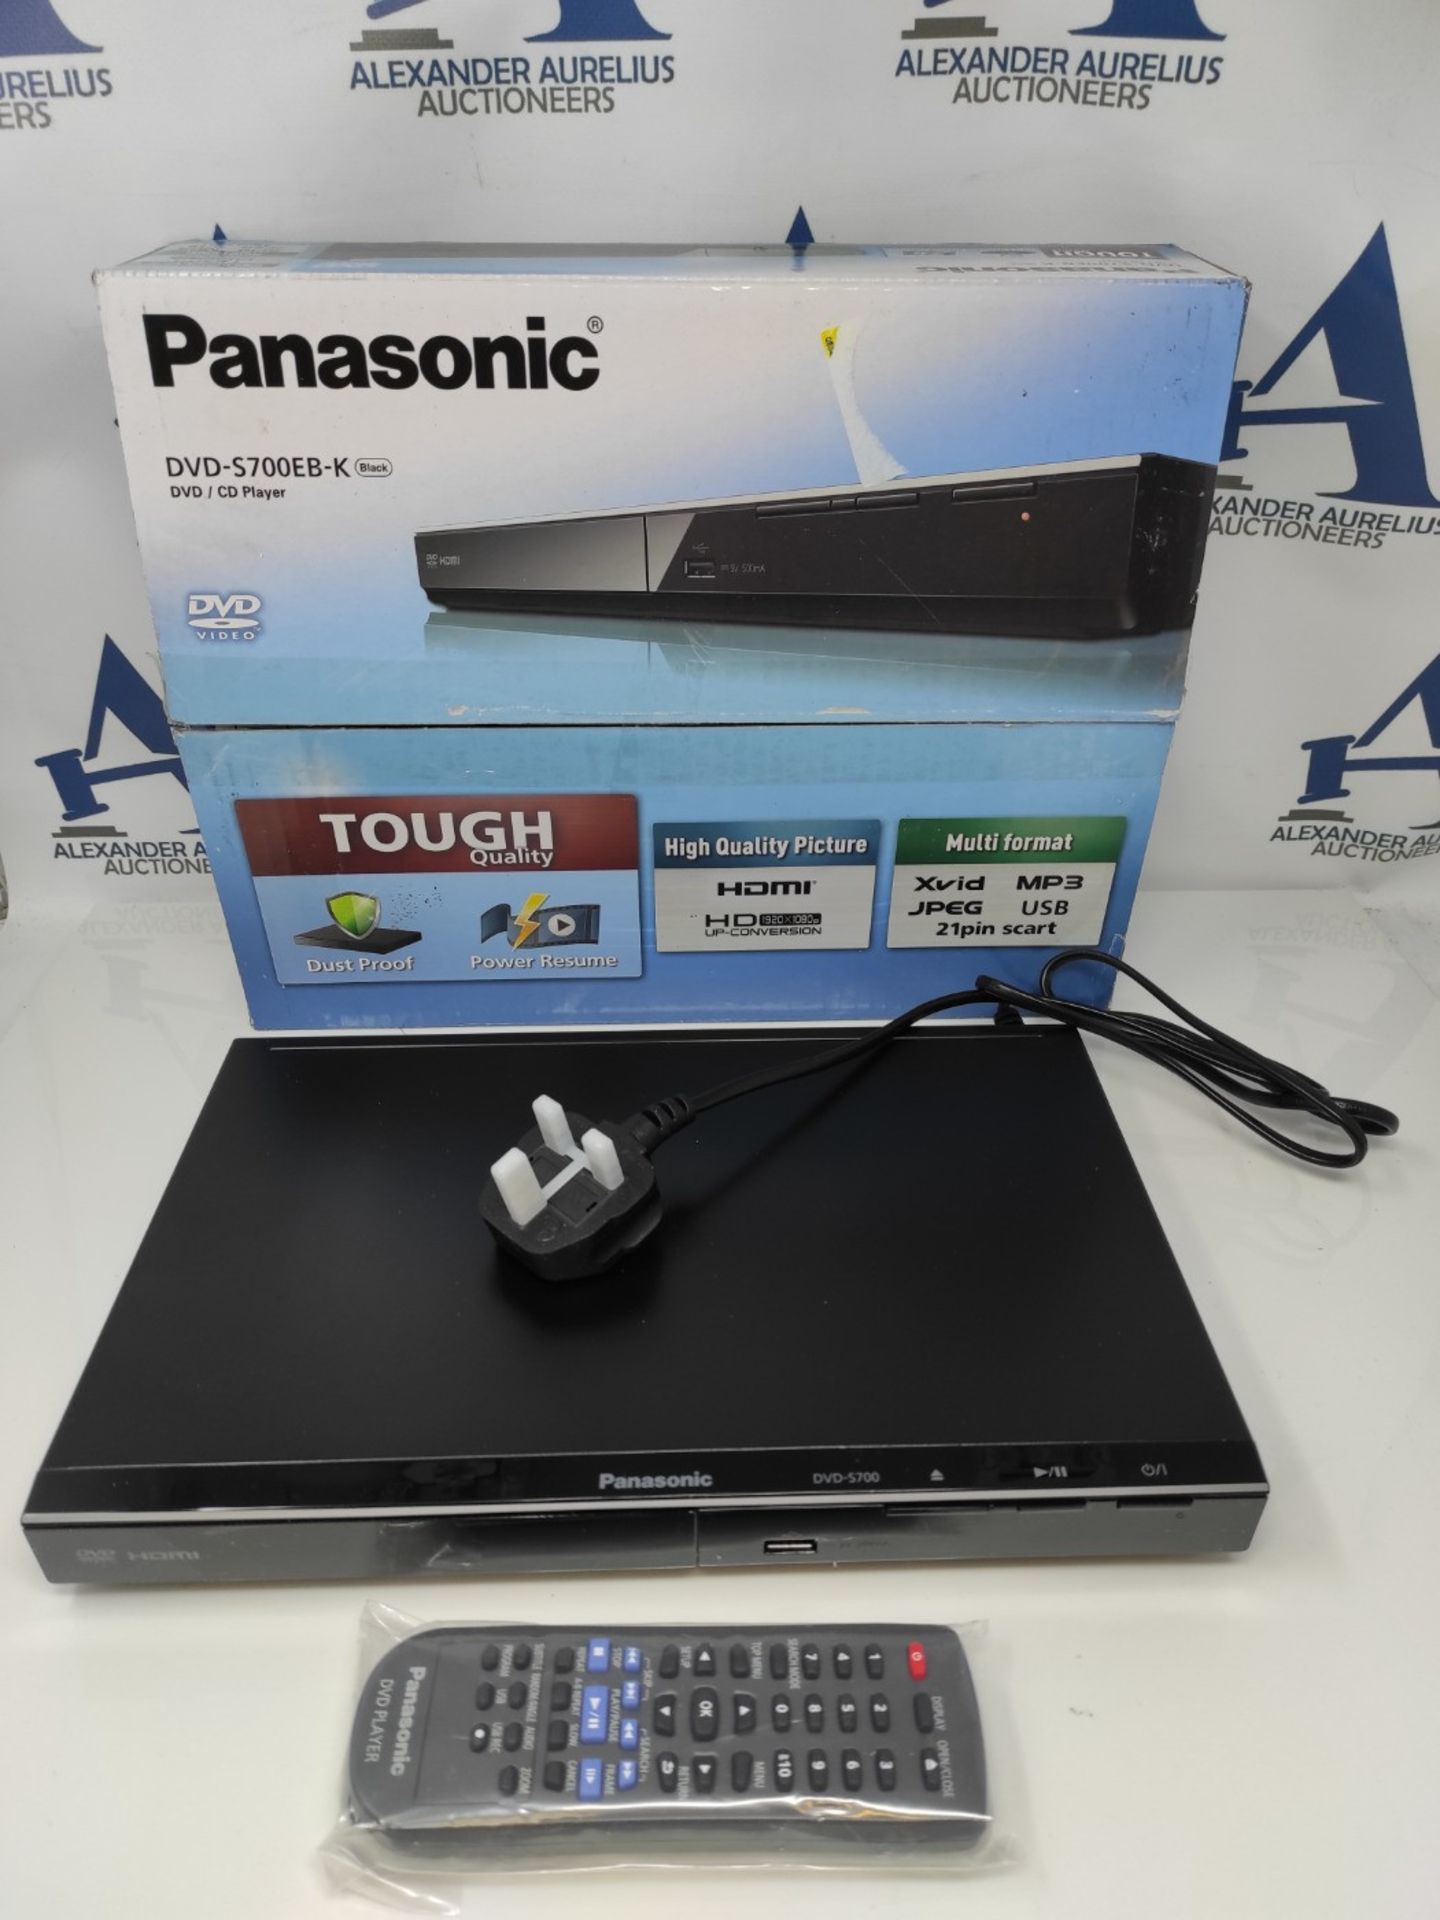 Panasonic DVD-S700EB-K DVD Player with Multi Format Playback - Image 2 of 2